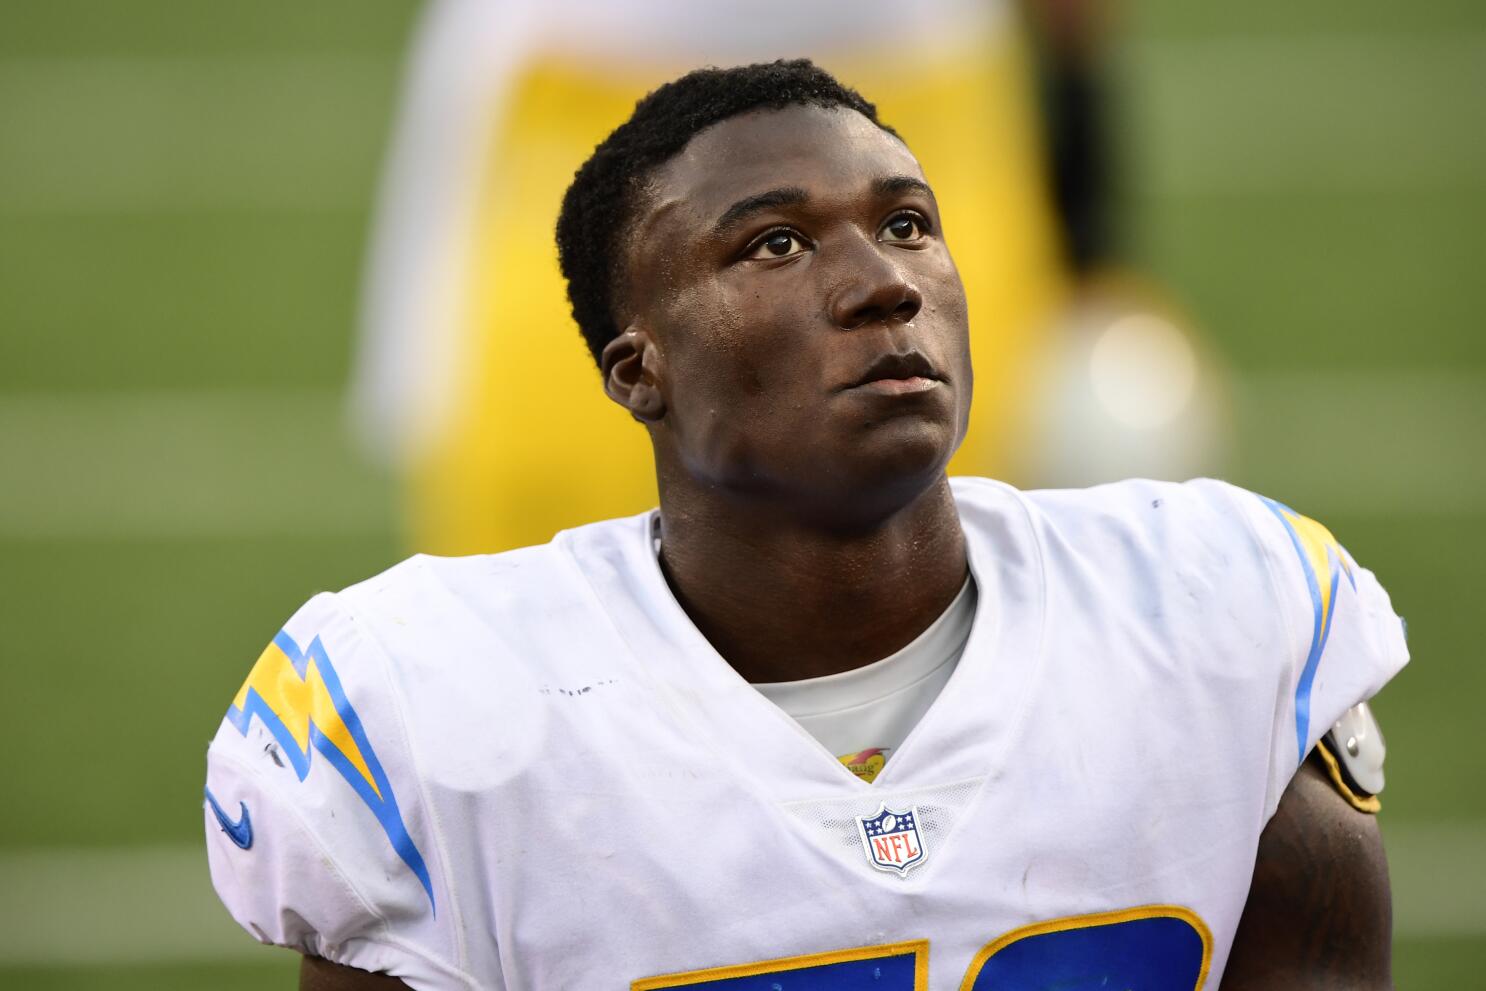 Los Angeles Chargers rookie linebacker Kenneth Murray is 'poised